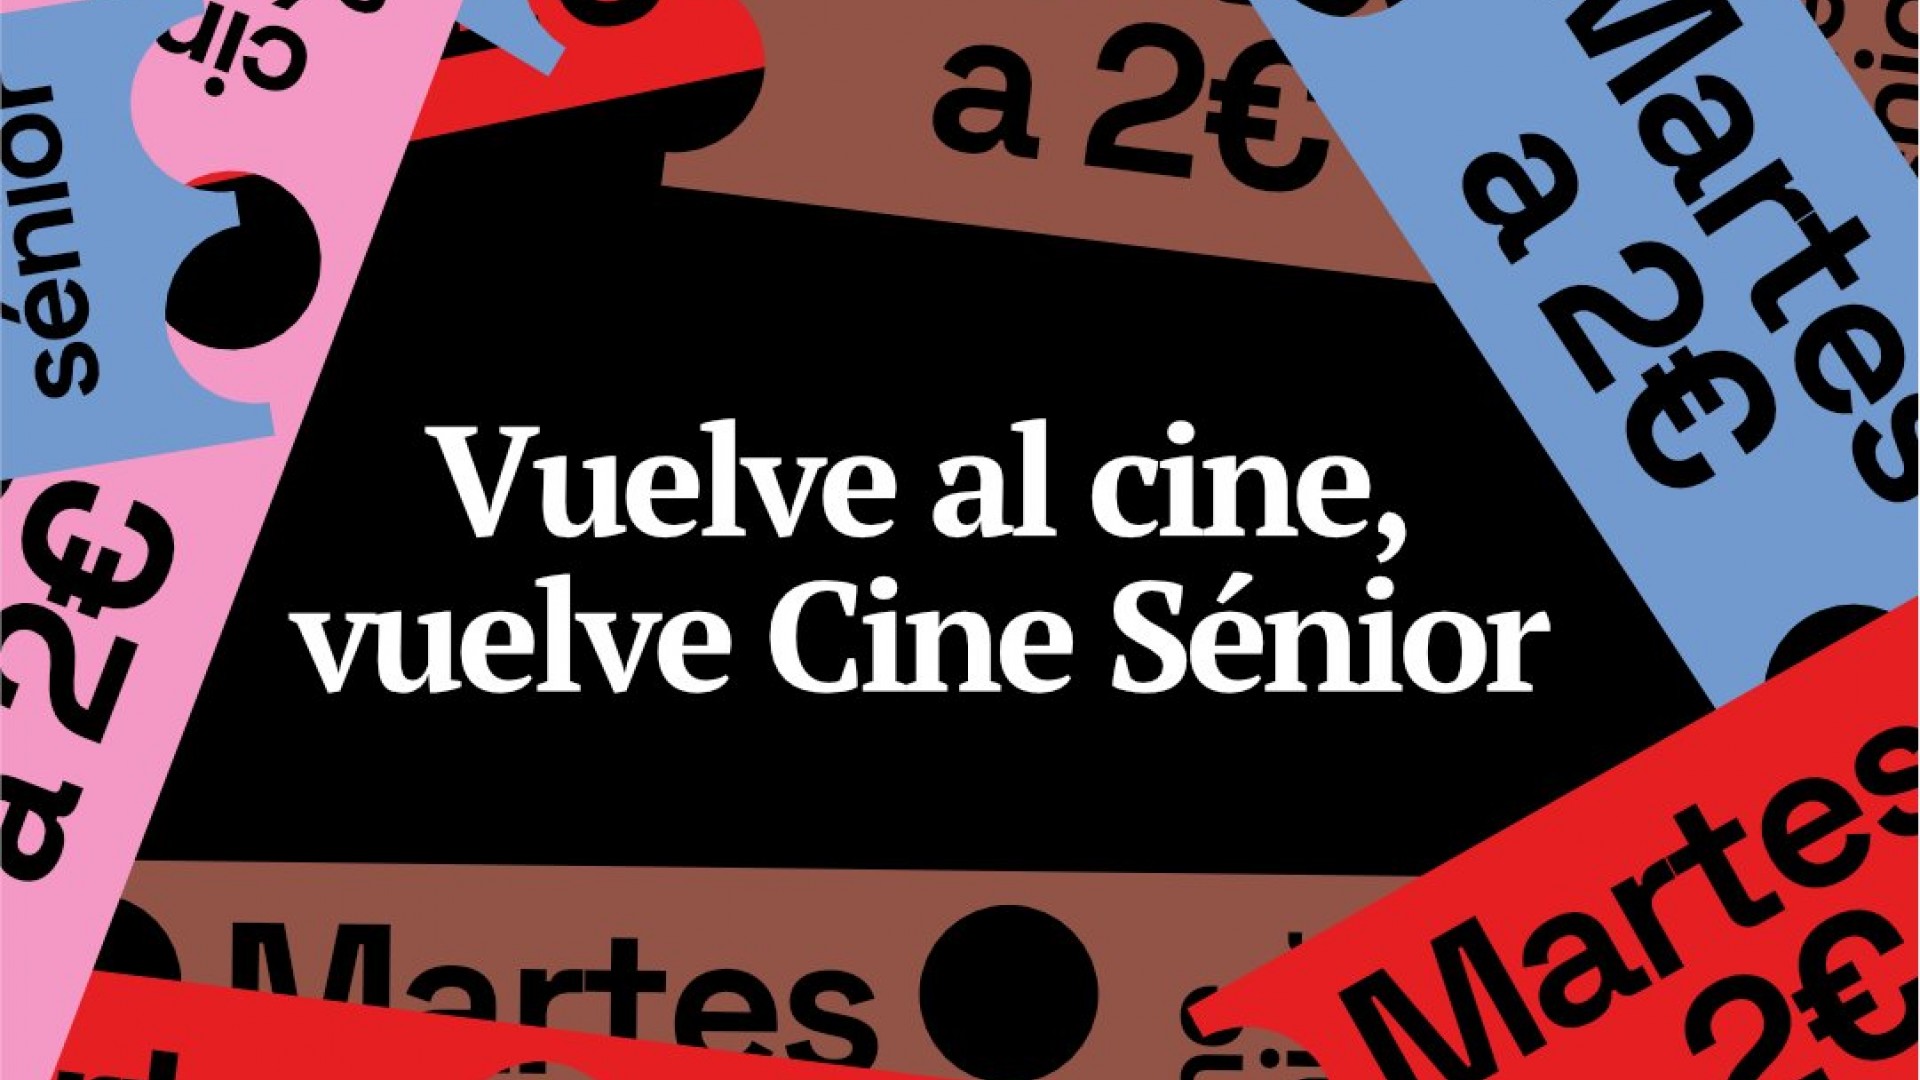 TICKETS FOR €2 EVERY TUESDAY WITH CINE SÉNIOR PROGRAMME